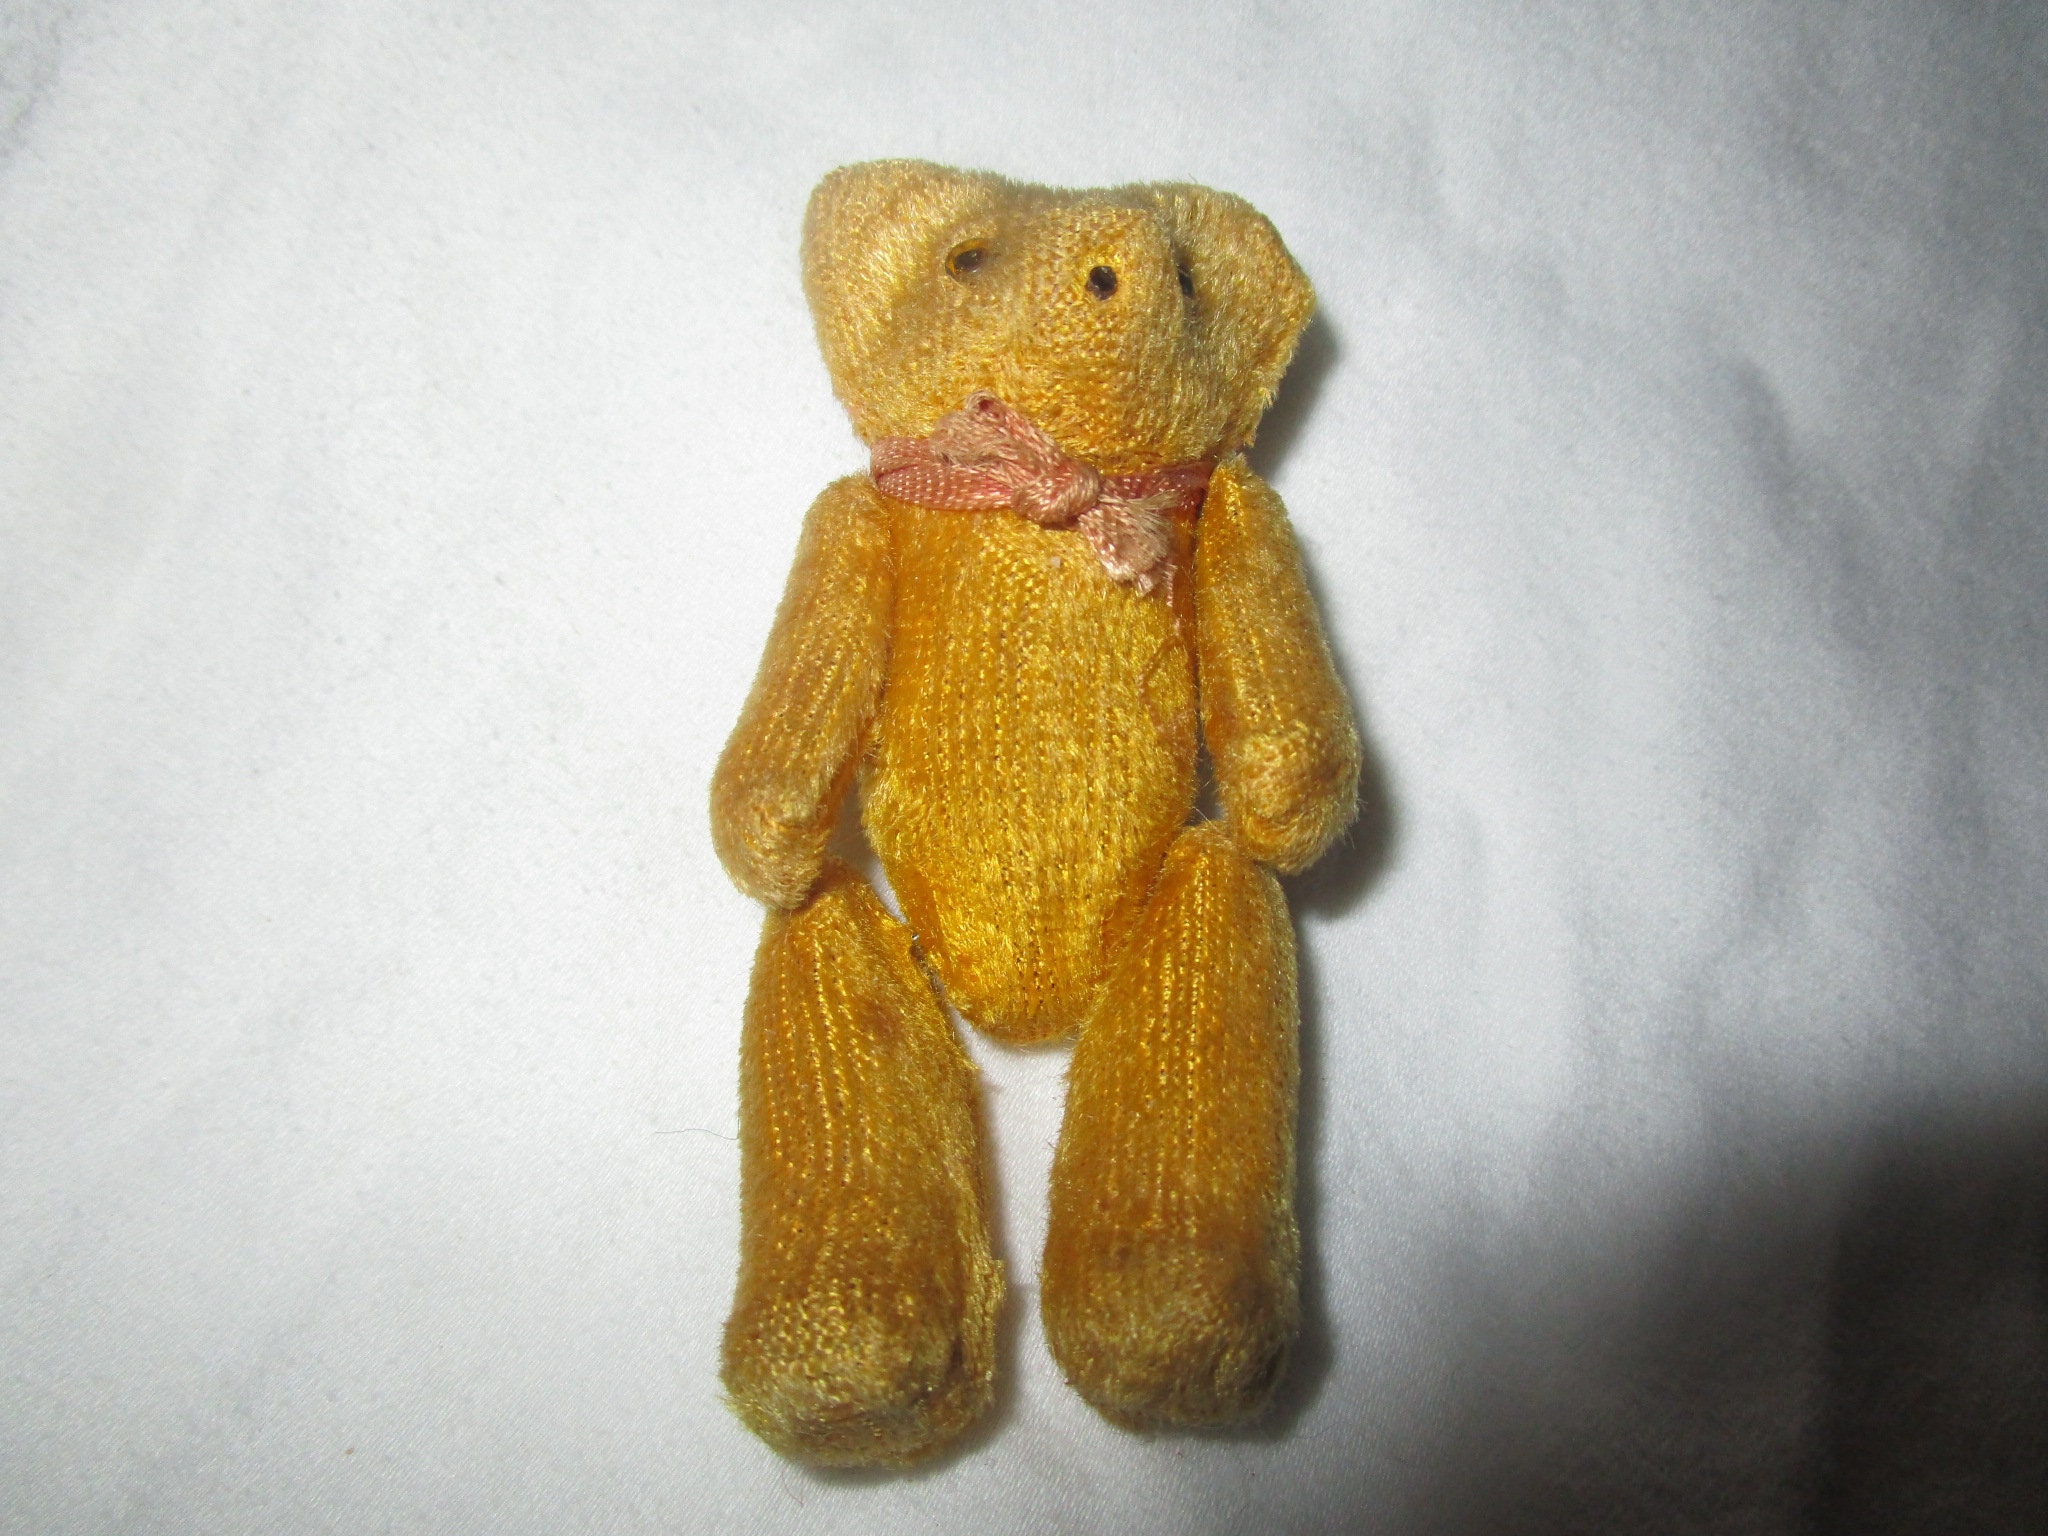 Antique 8 mohair bear - straw stuffed and jointed - turn of the century